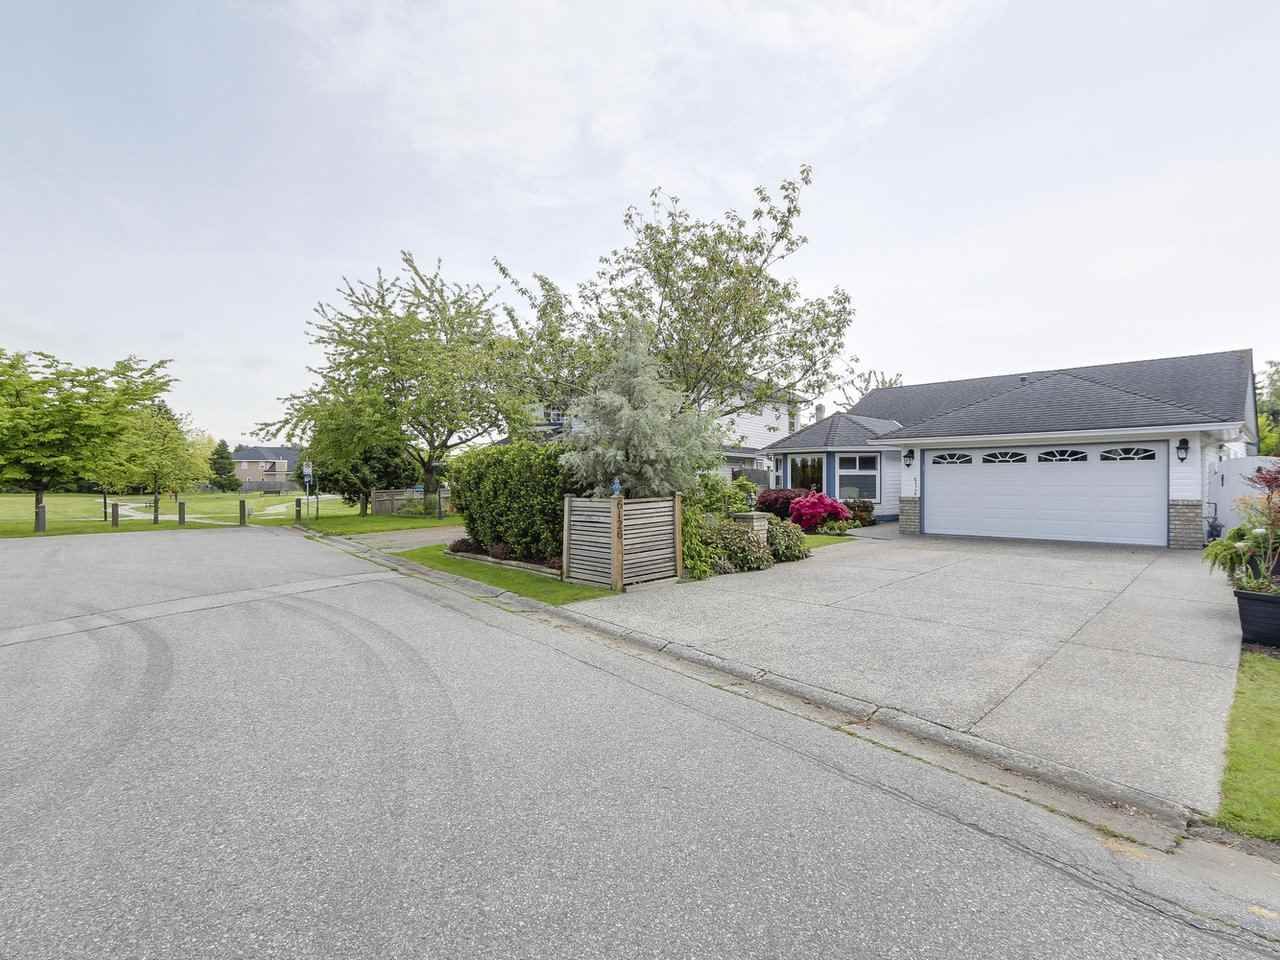 Main Photo: 6126 GALBRAITH CRESCENT in Delta: Holly House for sale (Ladner)  : MLS®# R2168761